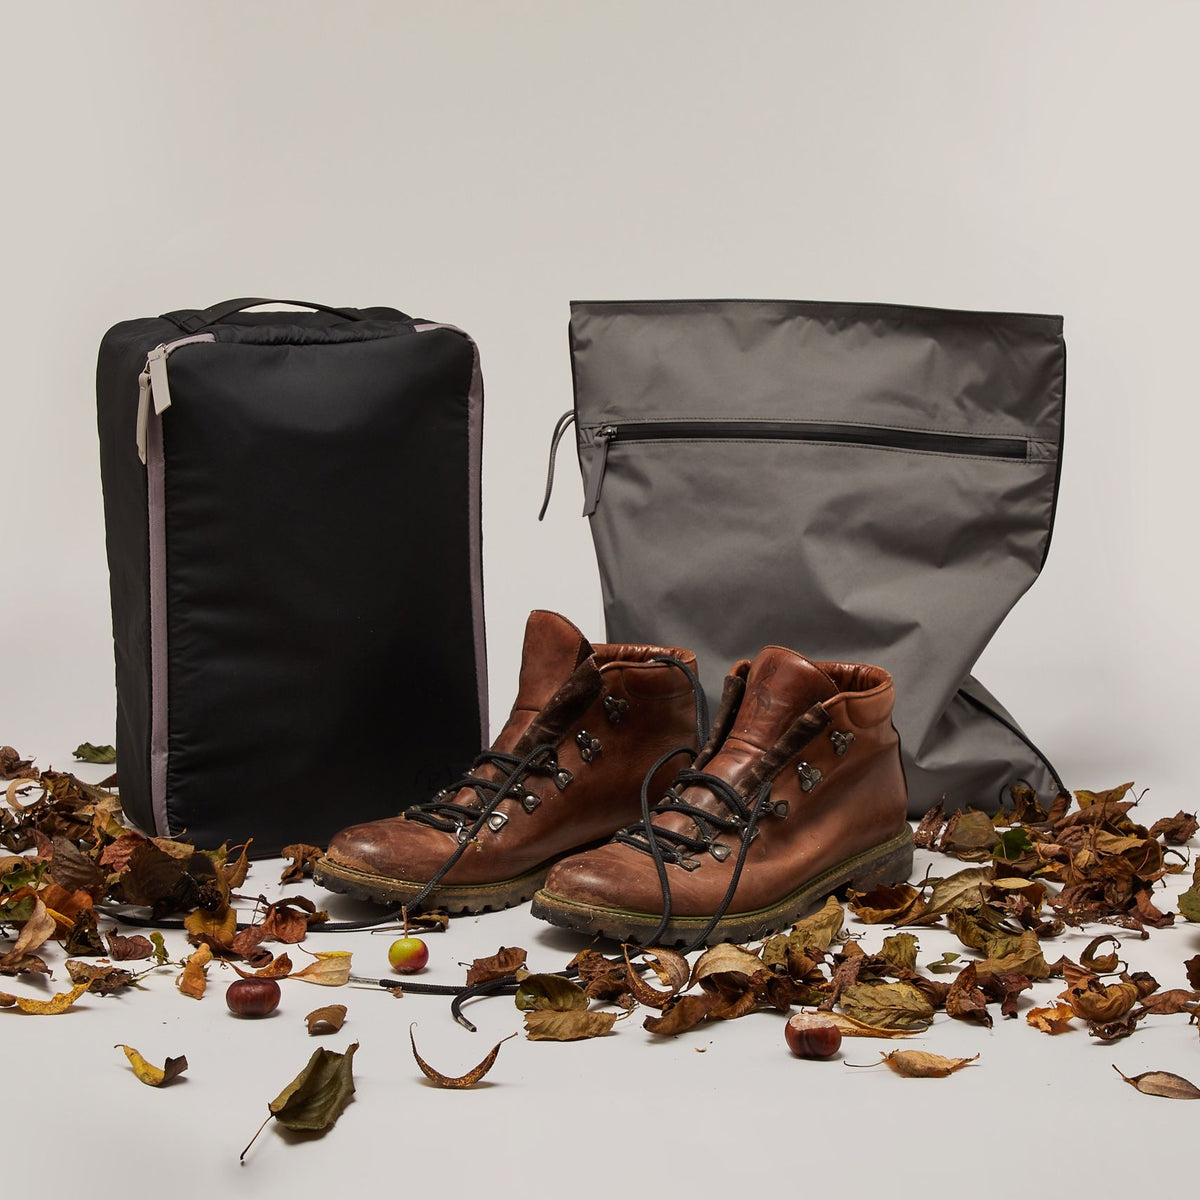 Large Ink Pewter Shoe Carry with Pewter ink Kit Bag.  A pair of walking boots are in front of the bags.